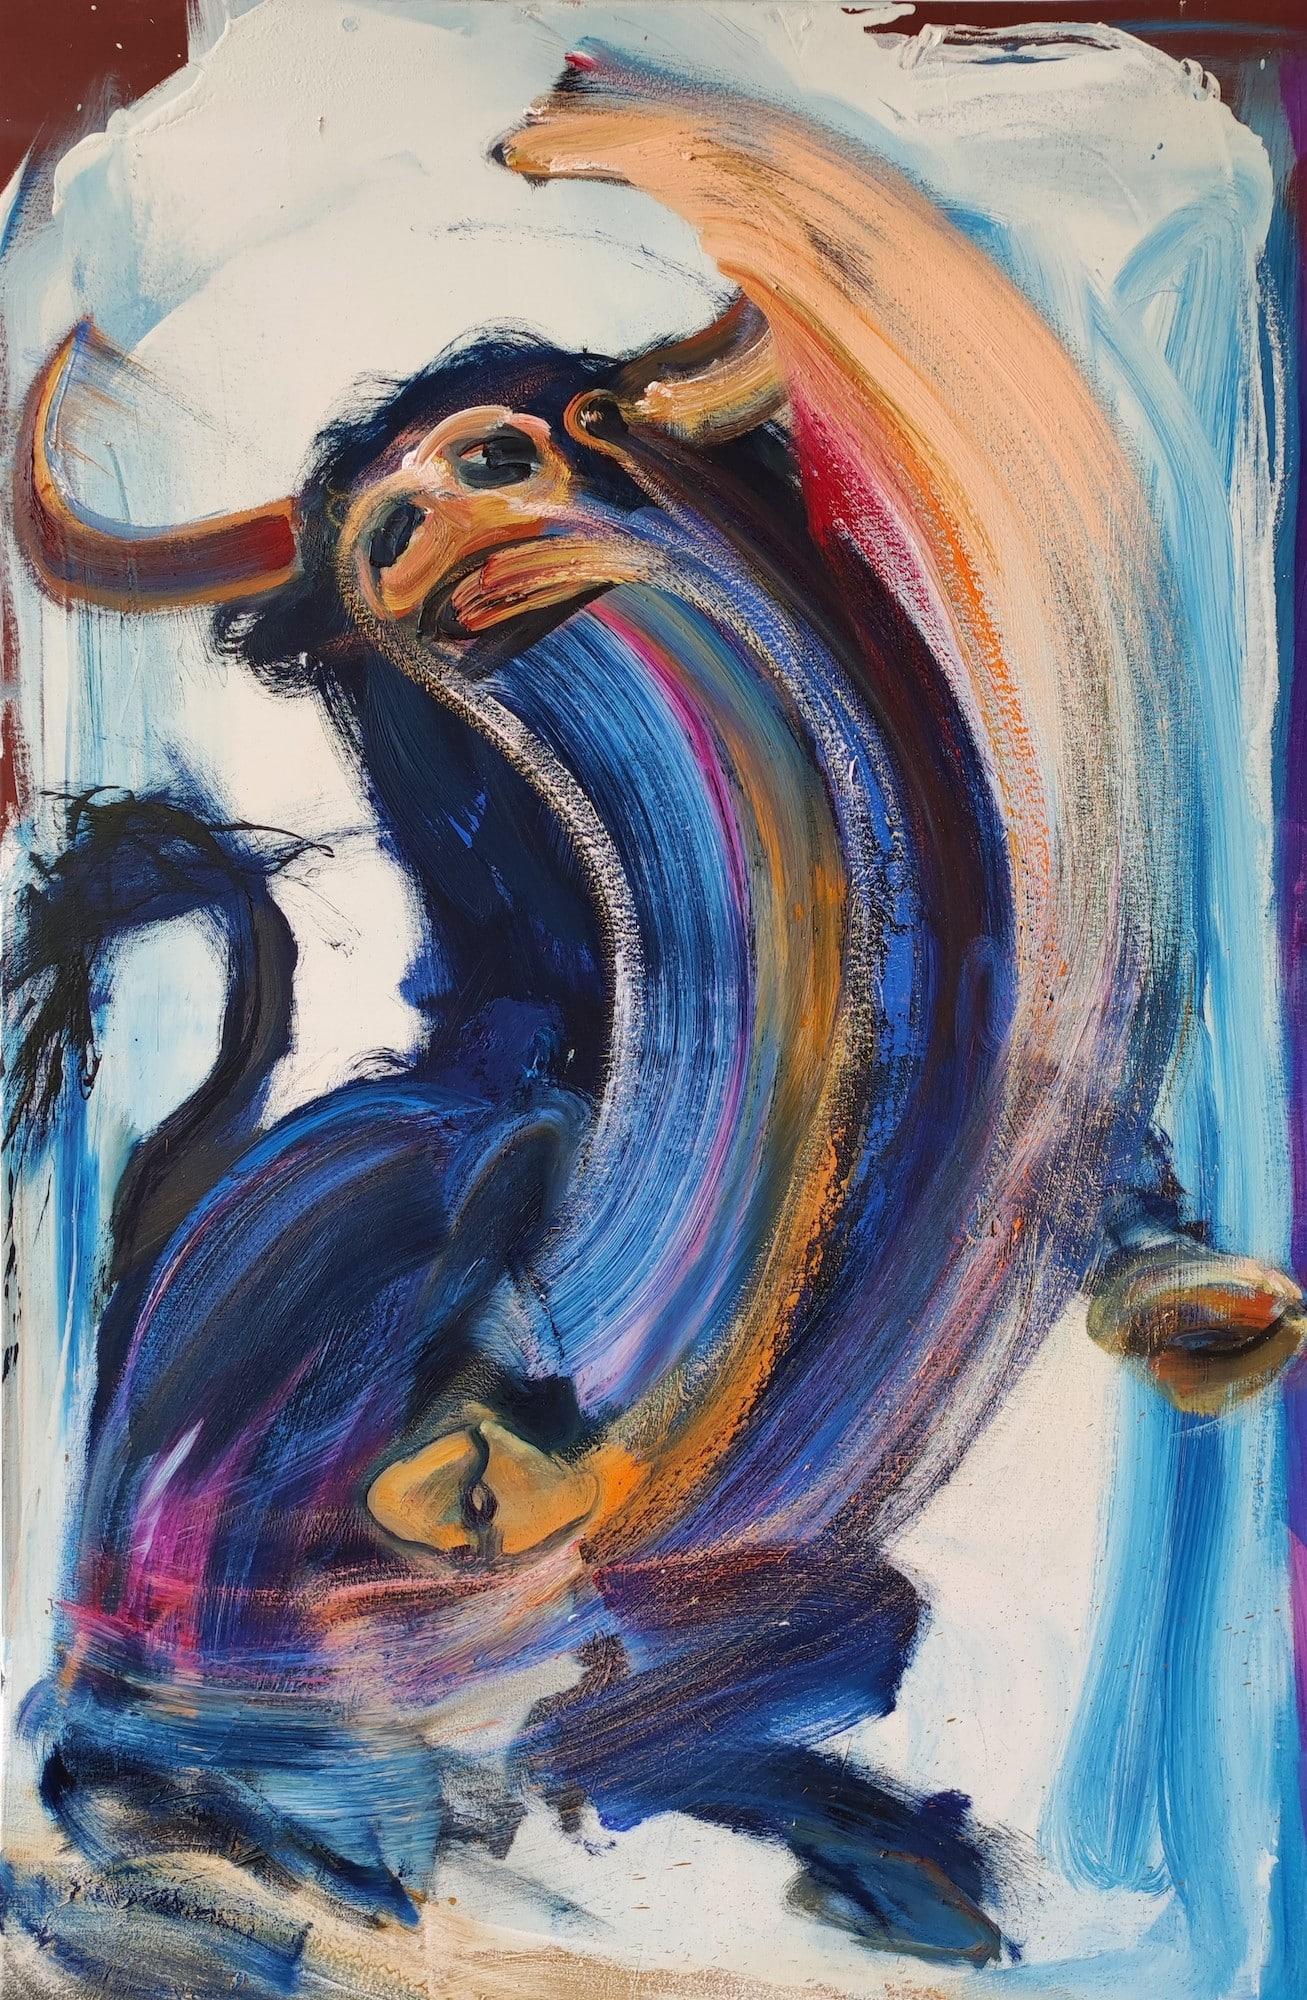 Cogida (2023) by French contemporary artist Christophe Dupety. Oil on canvas, H 115 x W 75 cm // 45.2 in x 29.5 in.
Christophe Dupety focuses on the portrayal of the animal, which takes centre stage of his composition. It is the animal's brute force